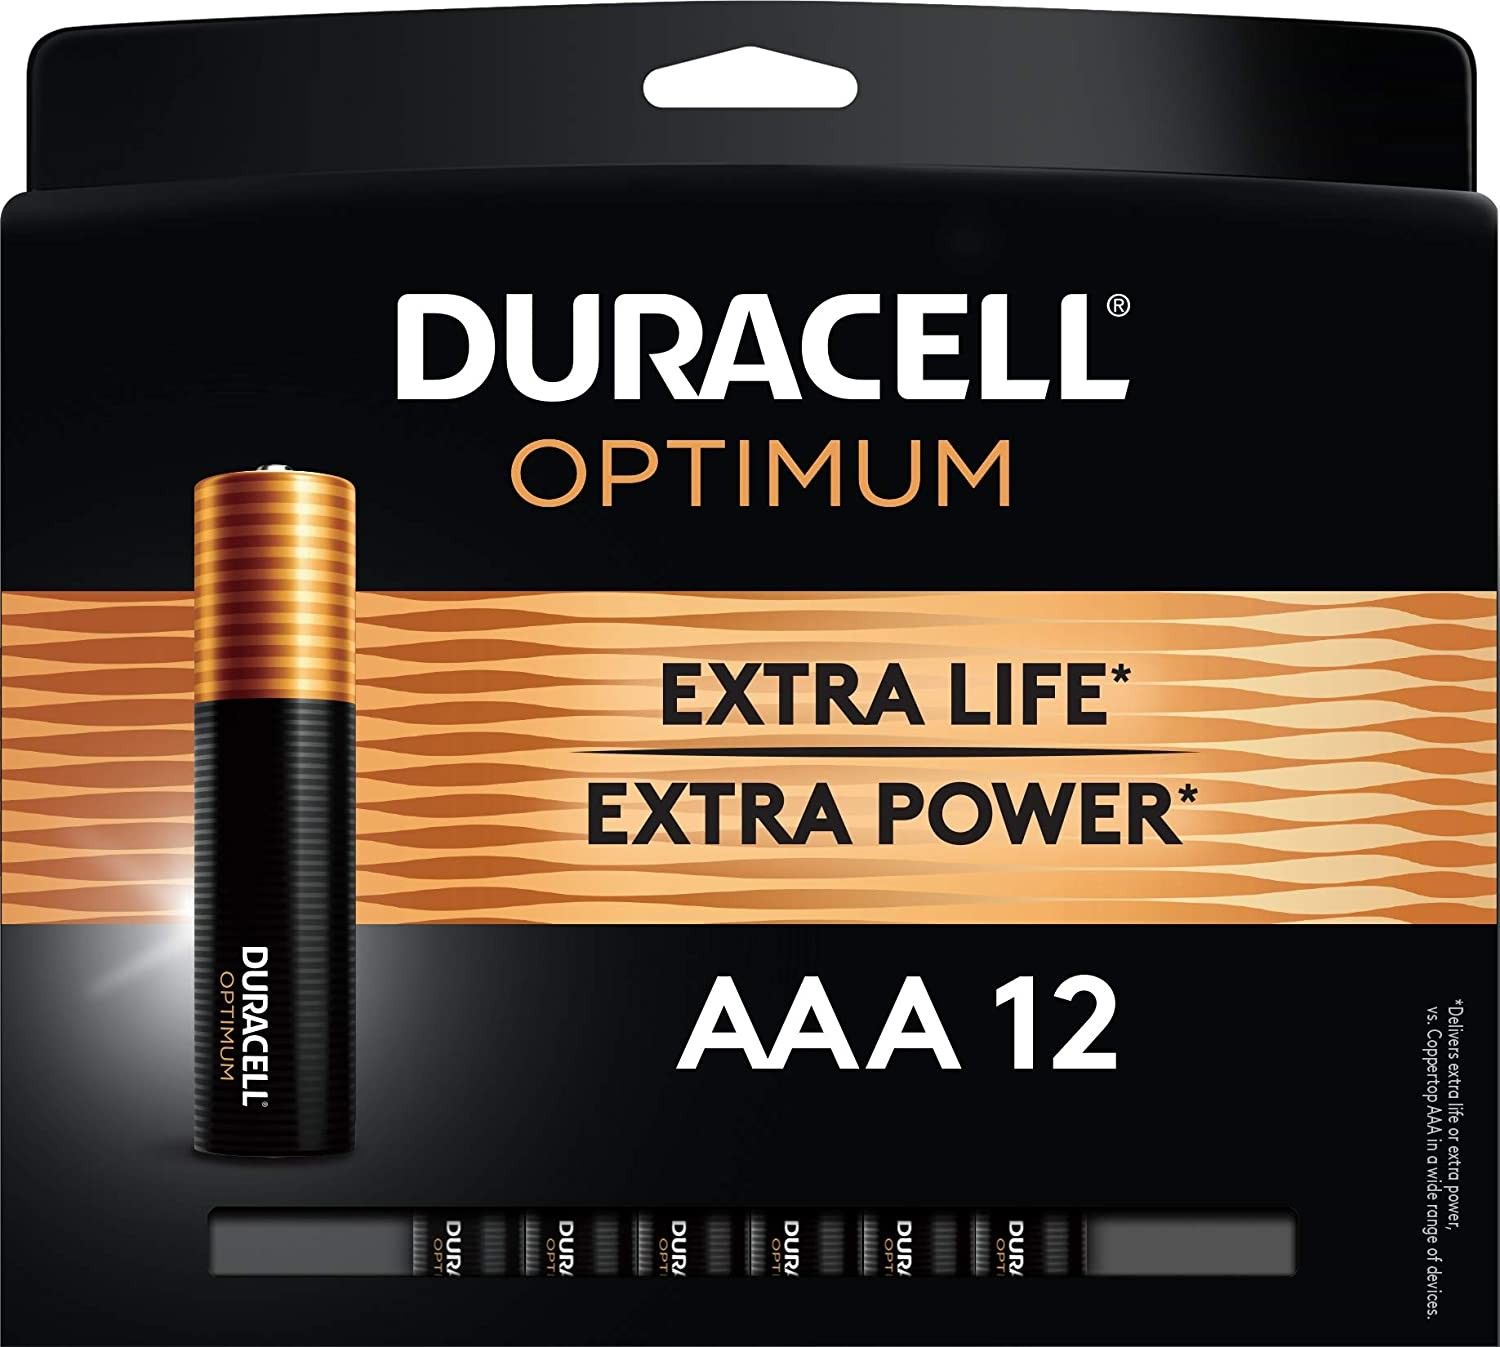 Optimum Duracell Batteries Can Leak and Don't Last, Class Action